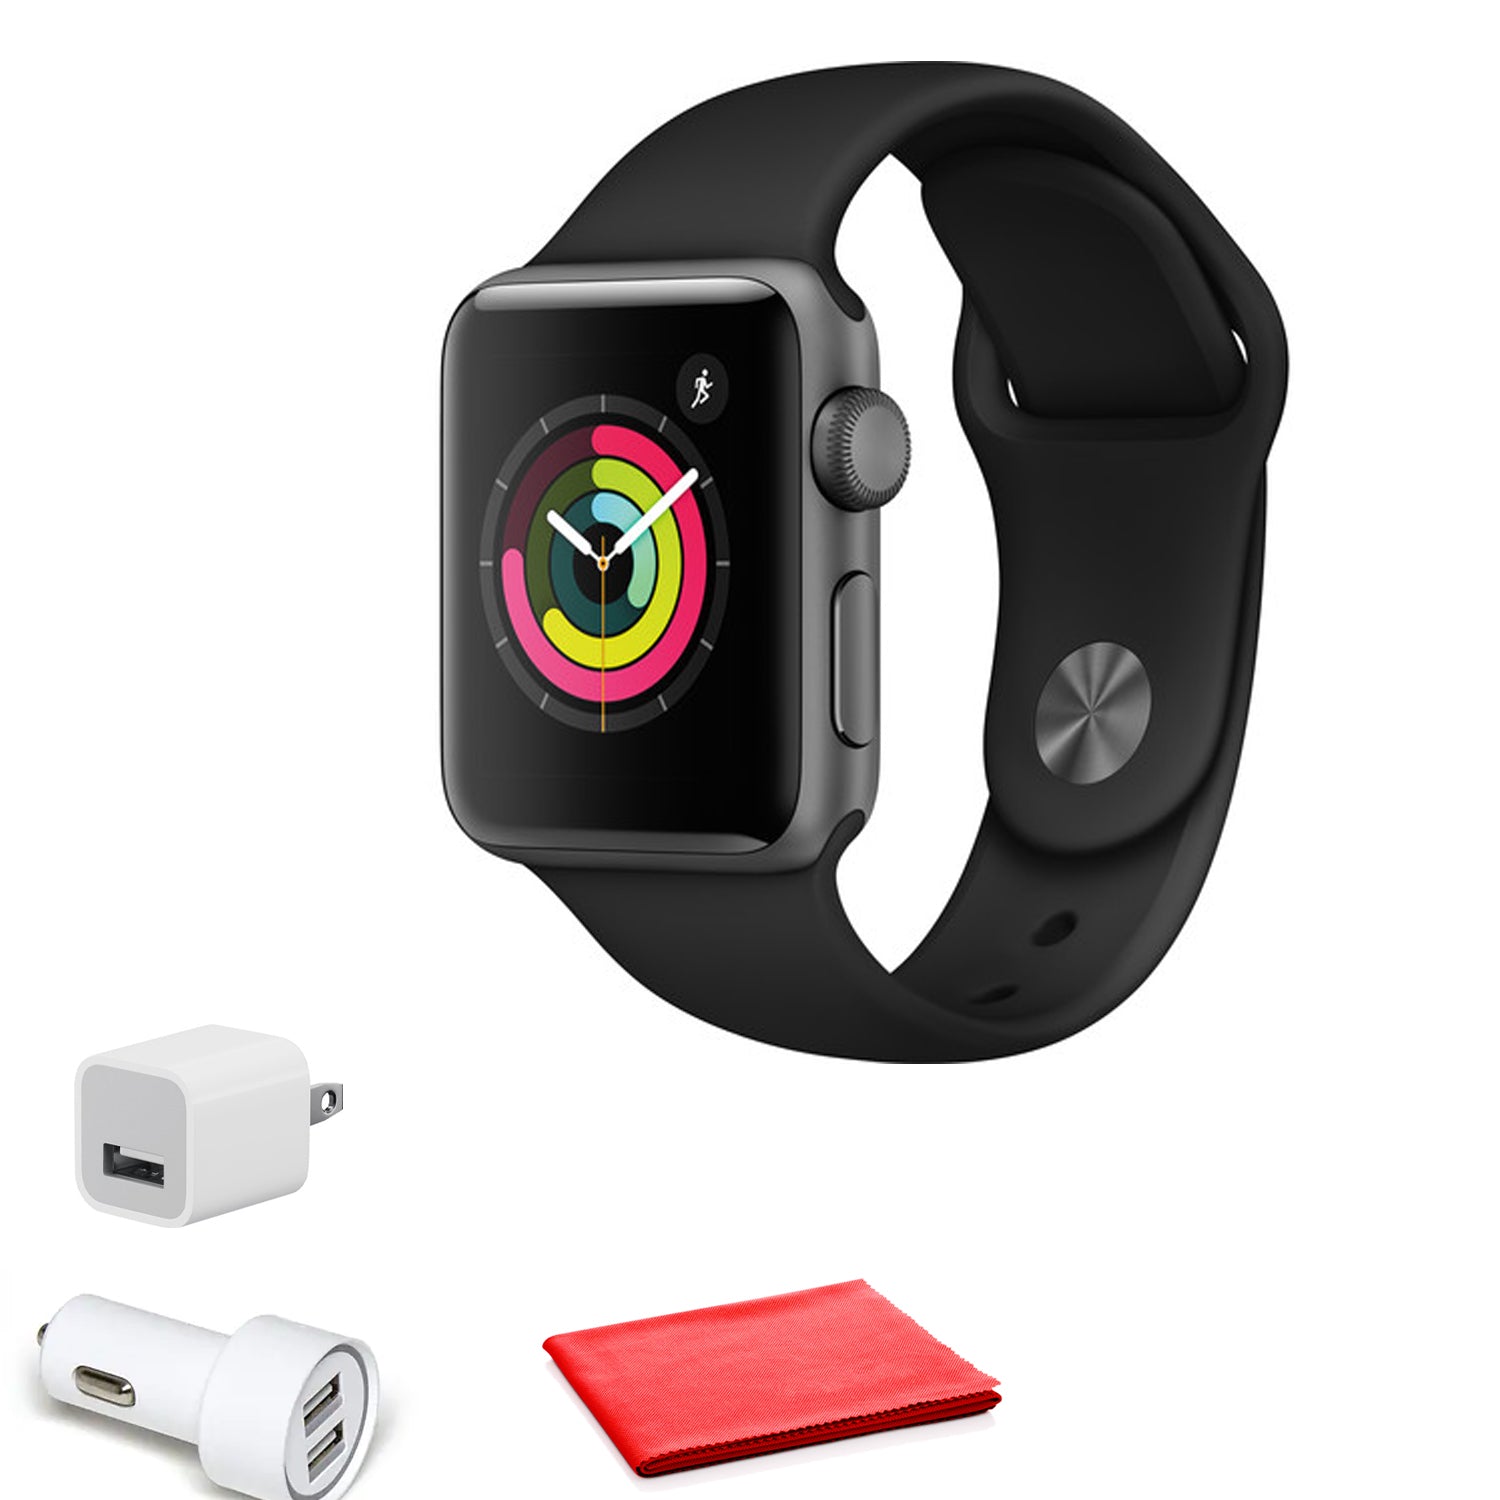 Apple Watch Series 3 GPS, 42mm Space Gray + Black Sport Band with USB Adapter Bundle